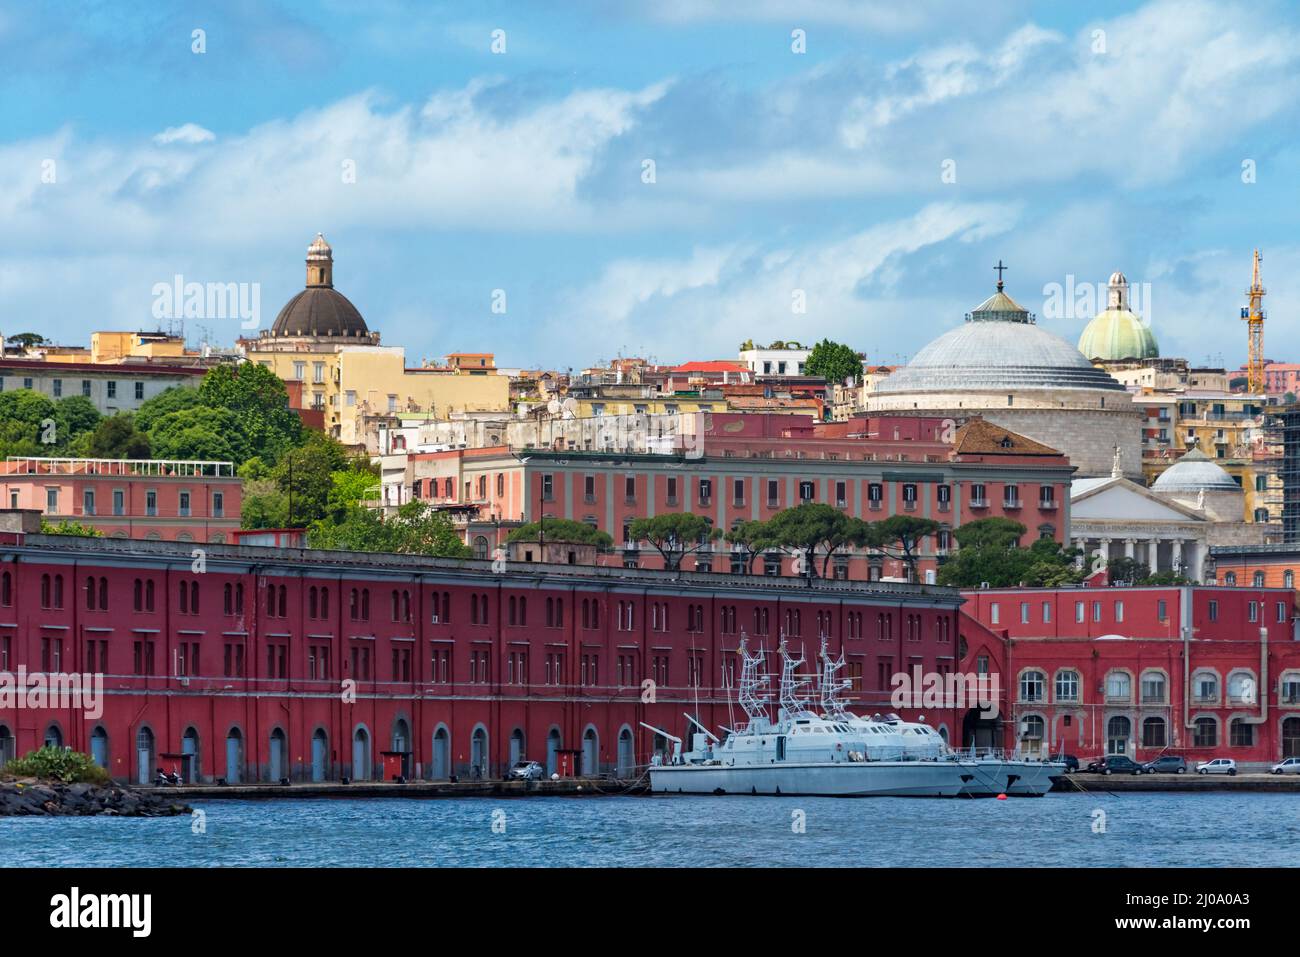 Harbor and buildings on the waterfront, Naples, Campania Region, Italy Stock Photo